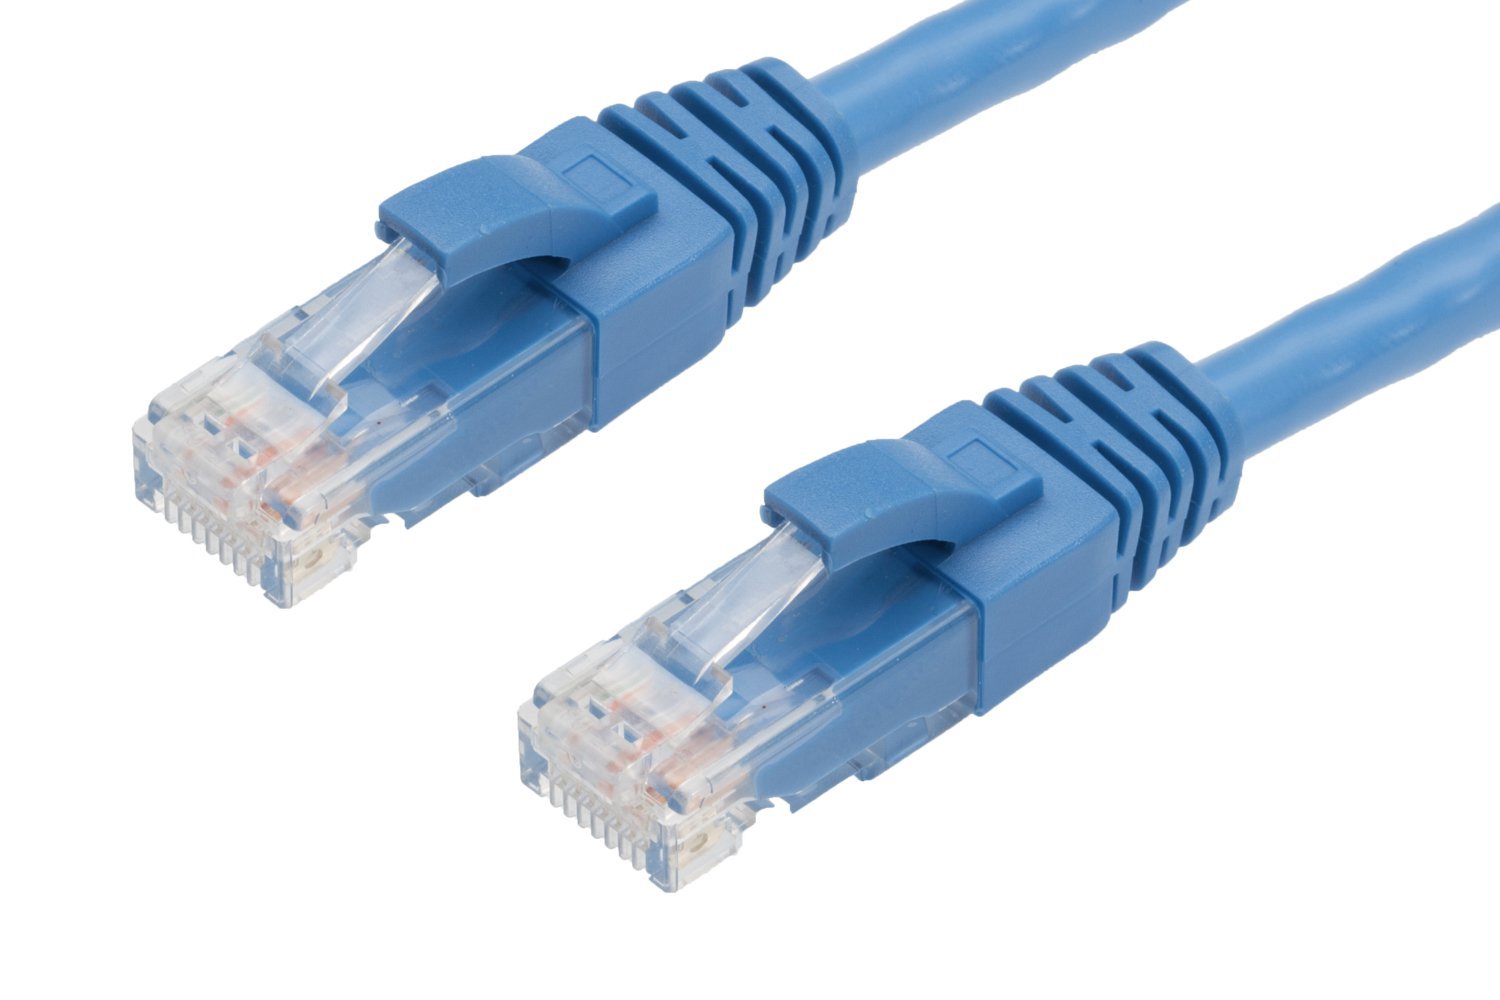 4Cabling 3M Cat 5E Ethernet Network Cable: Blue